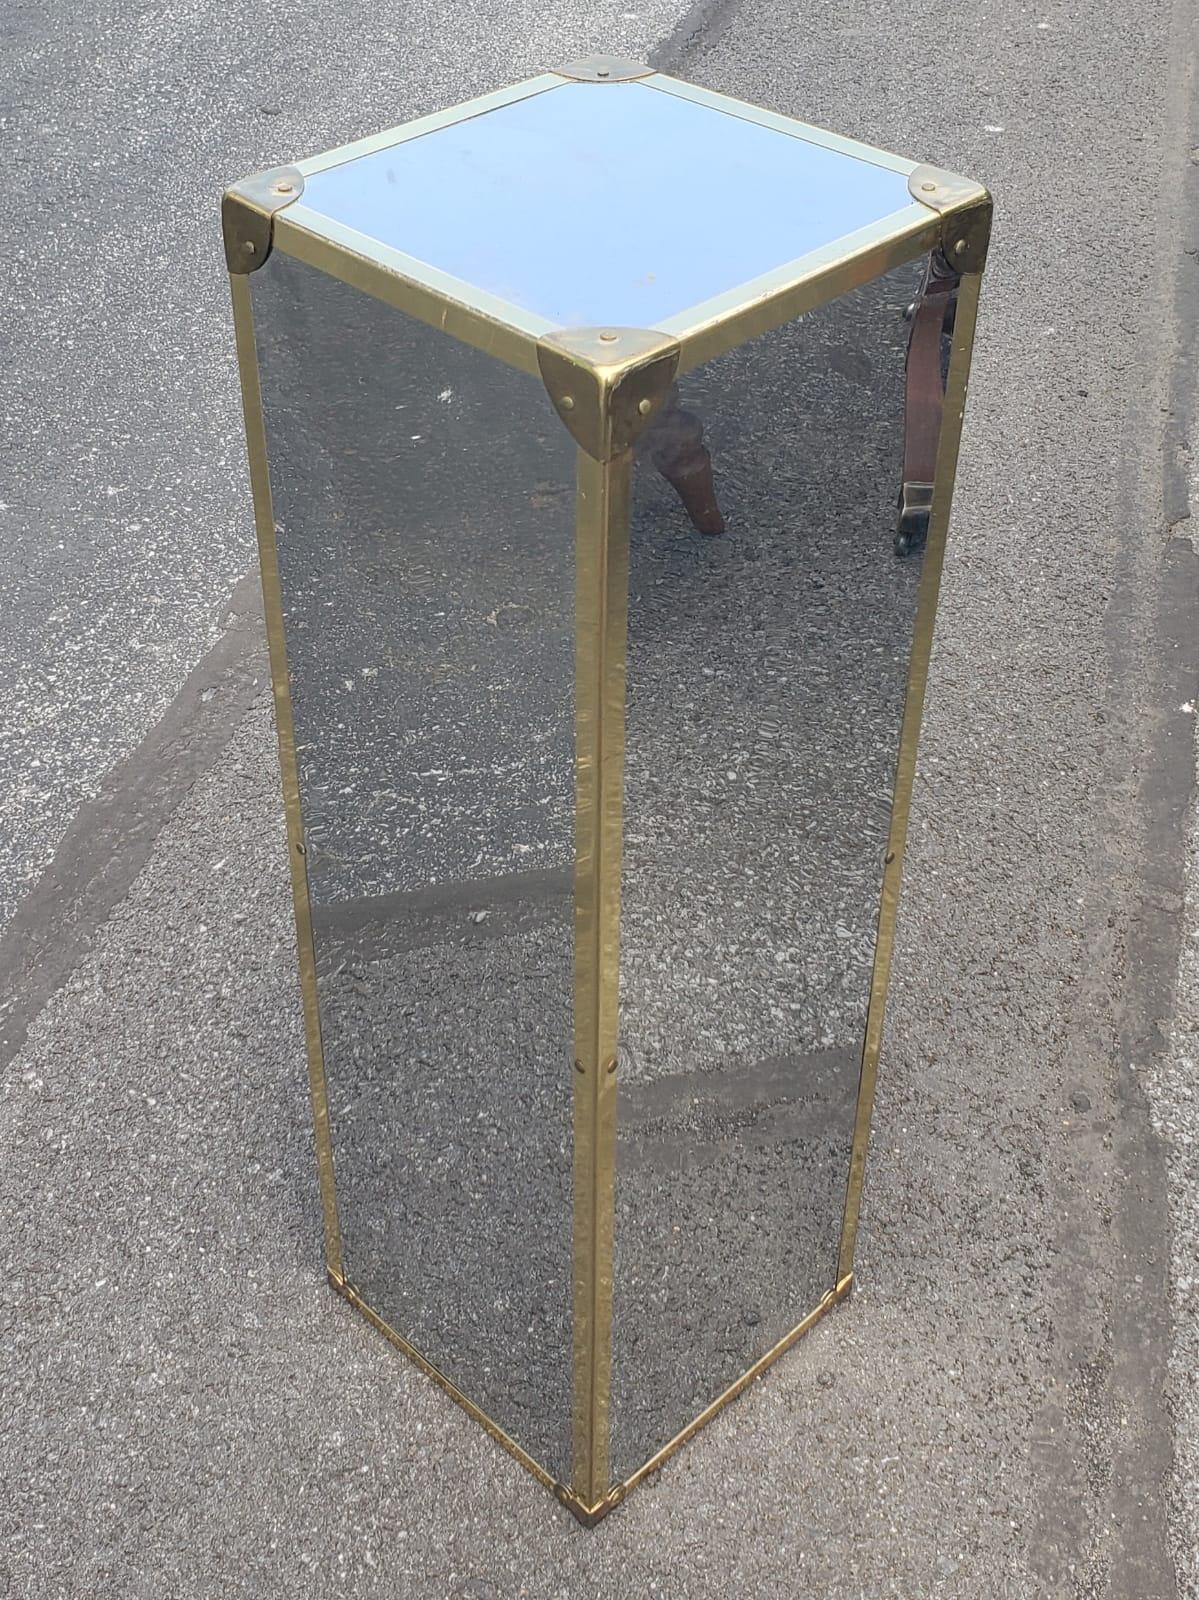 Mirrored Chrome Plated and Brass Mounted Corners Wood Pedestal / Column In Good Condition For Sale In Germantown, MD